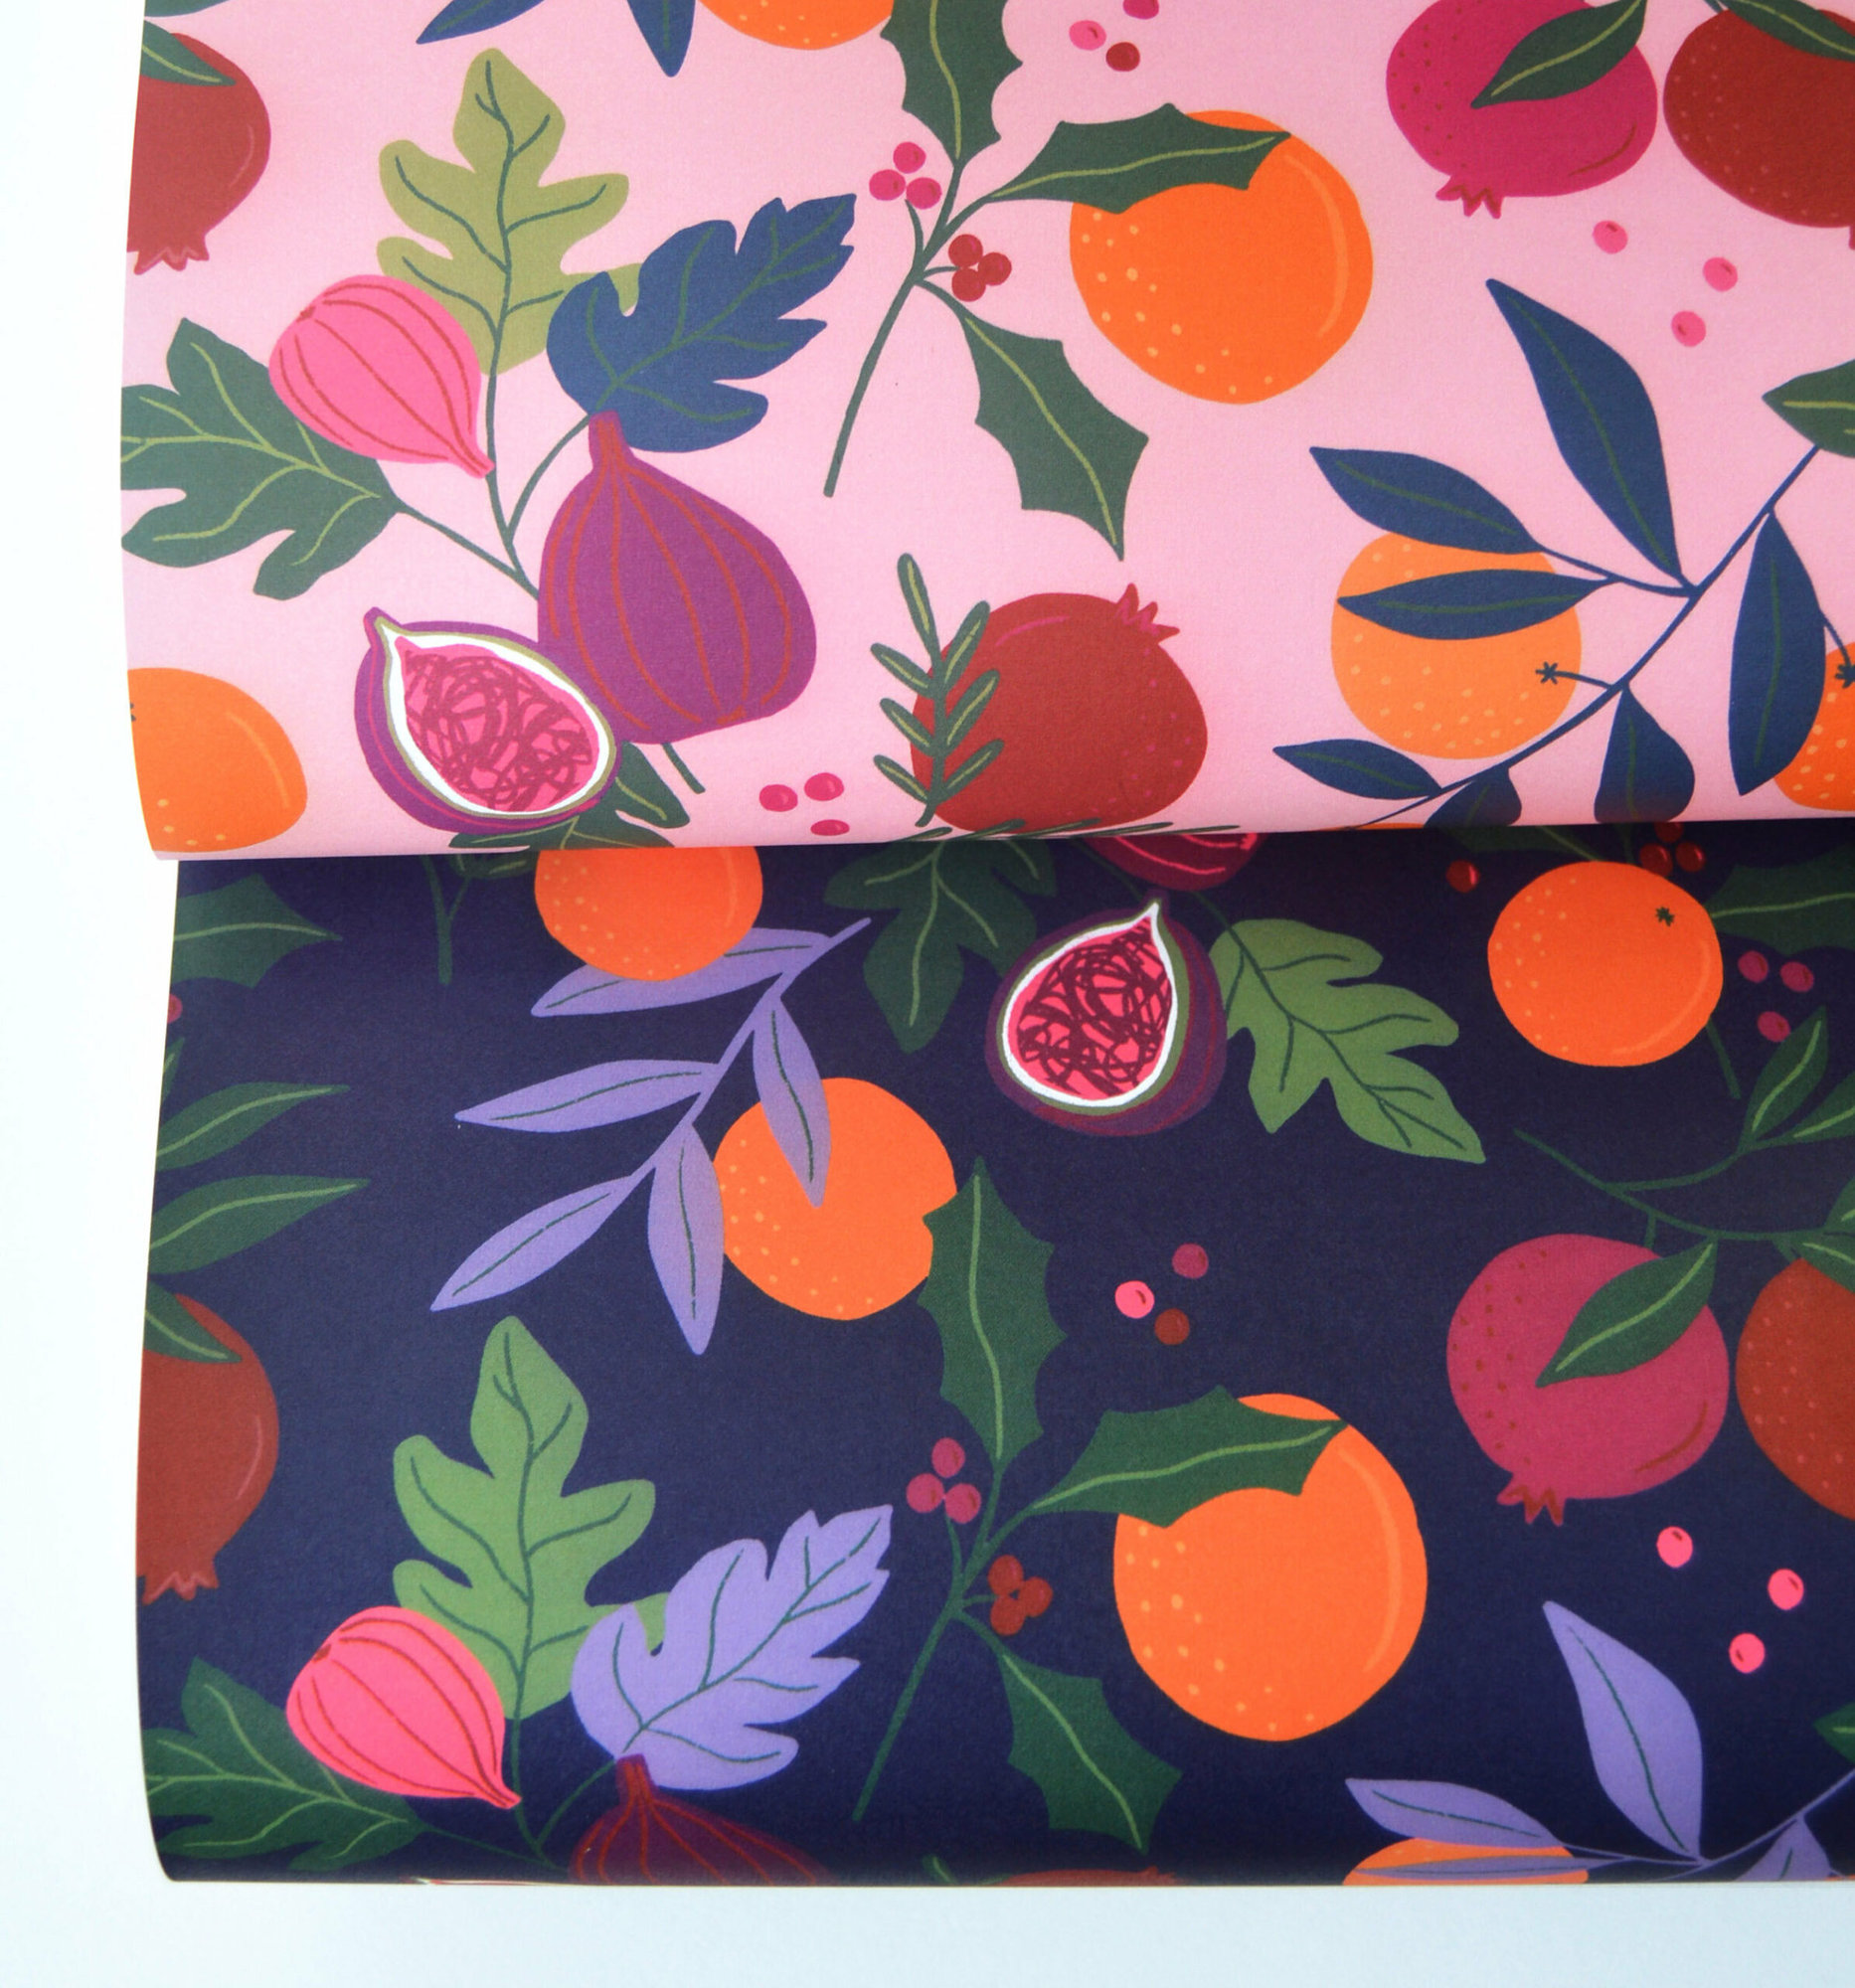 Botanical Fruits Wrapping Paper - Navy, Just the Wrap